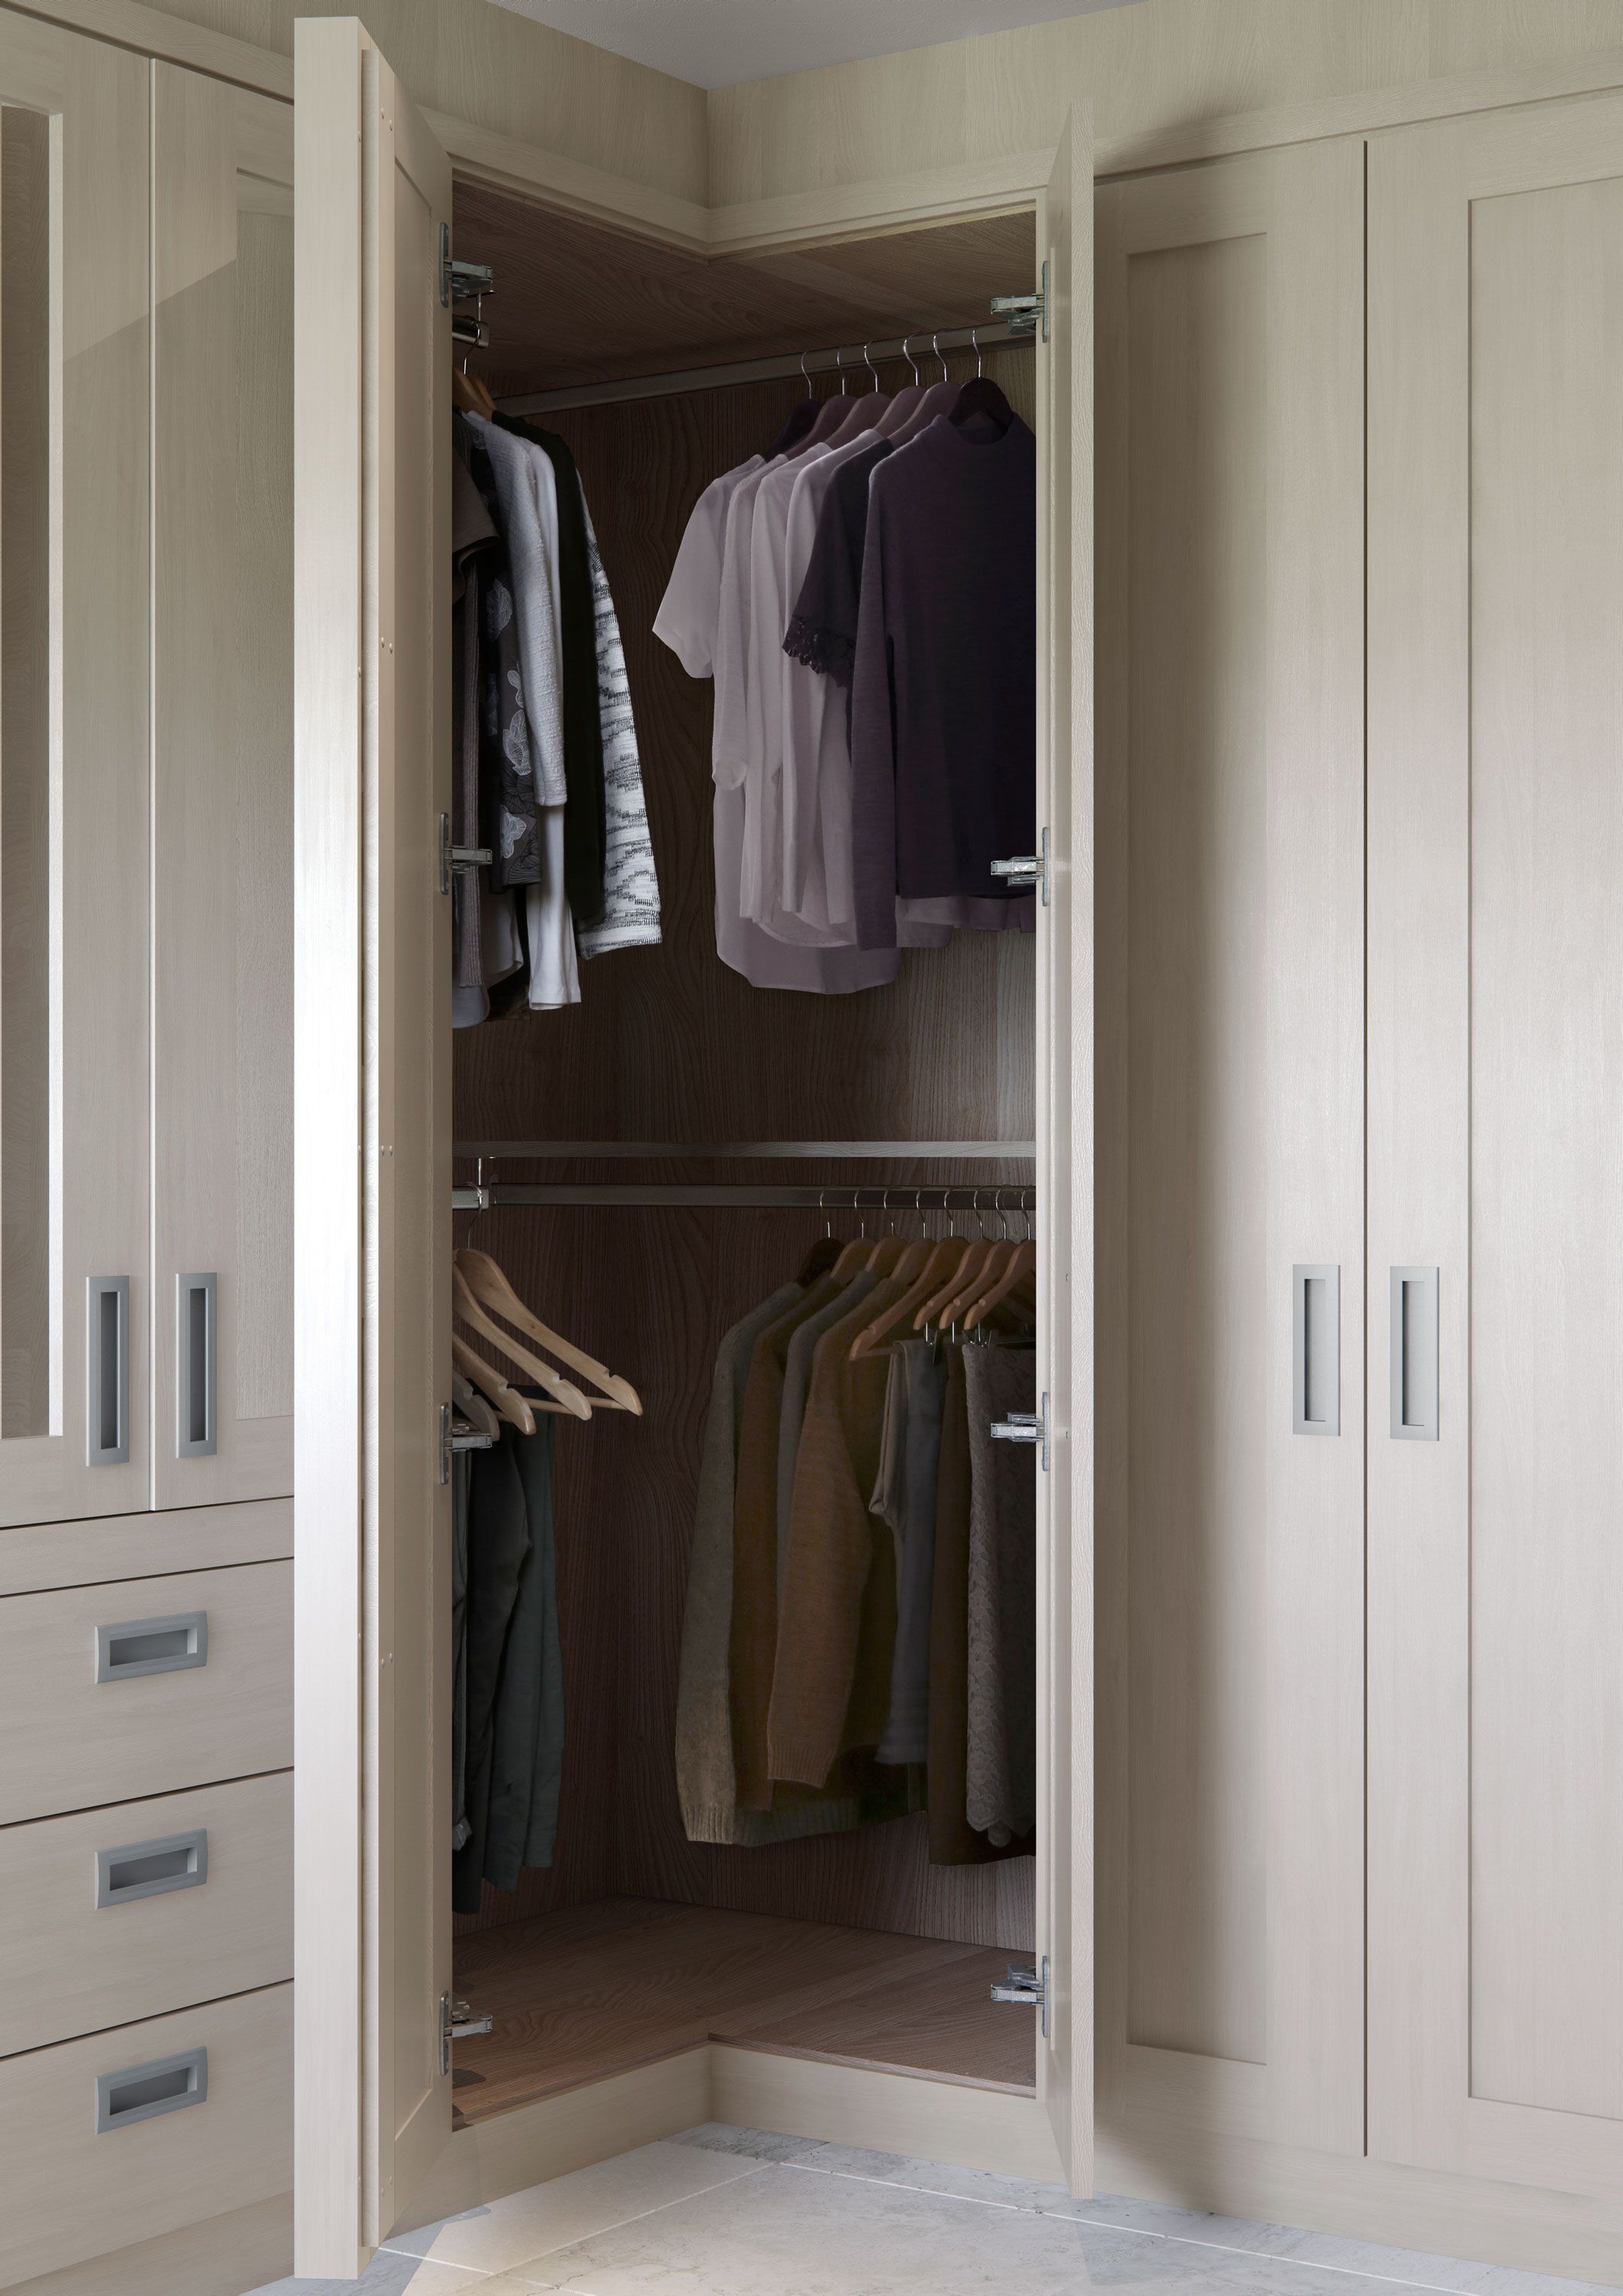 Make The Most Of The Corner Space With This Angled Double Hanging Rail. |  Corner Wardrobe, Corner Wardrobe Closet, Bedroom Built In Wardrobe Pertaining To Double Rail Wardrobes (Photo 8 of 15)